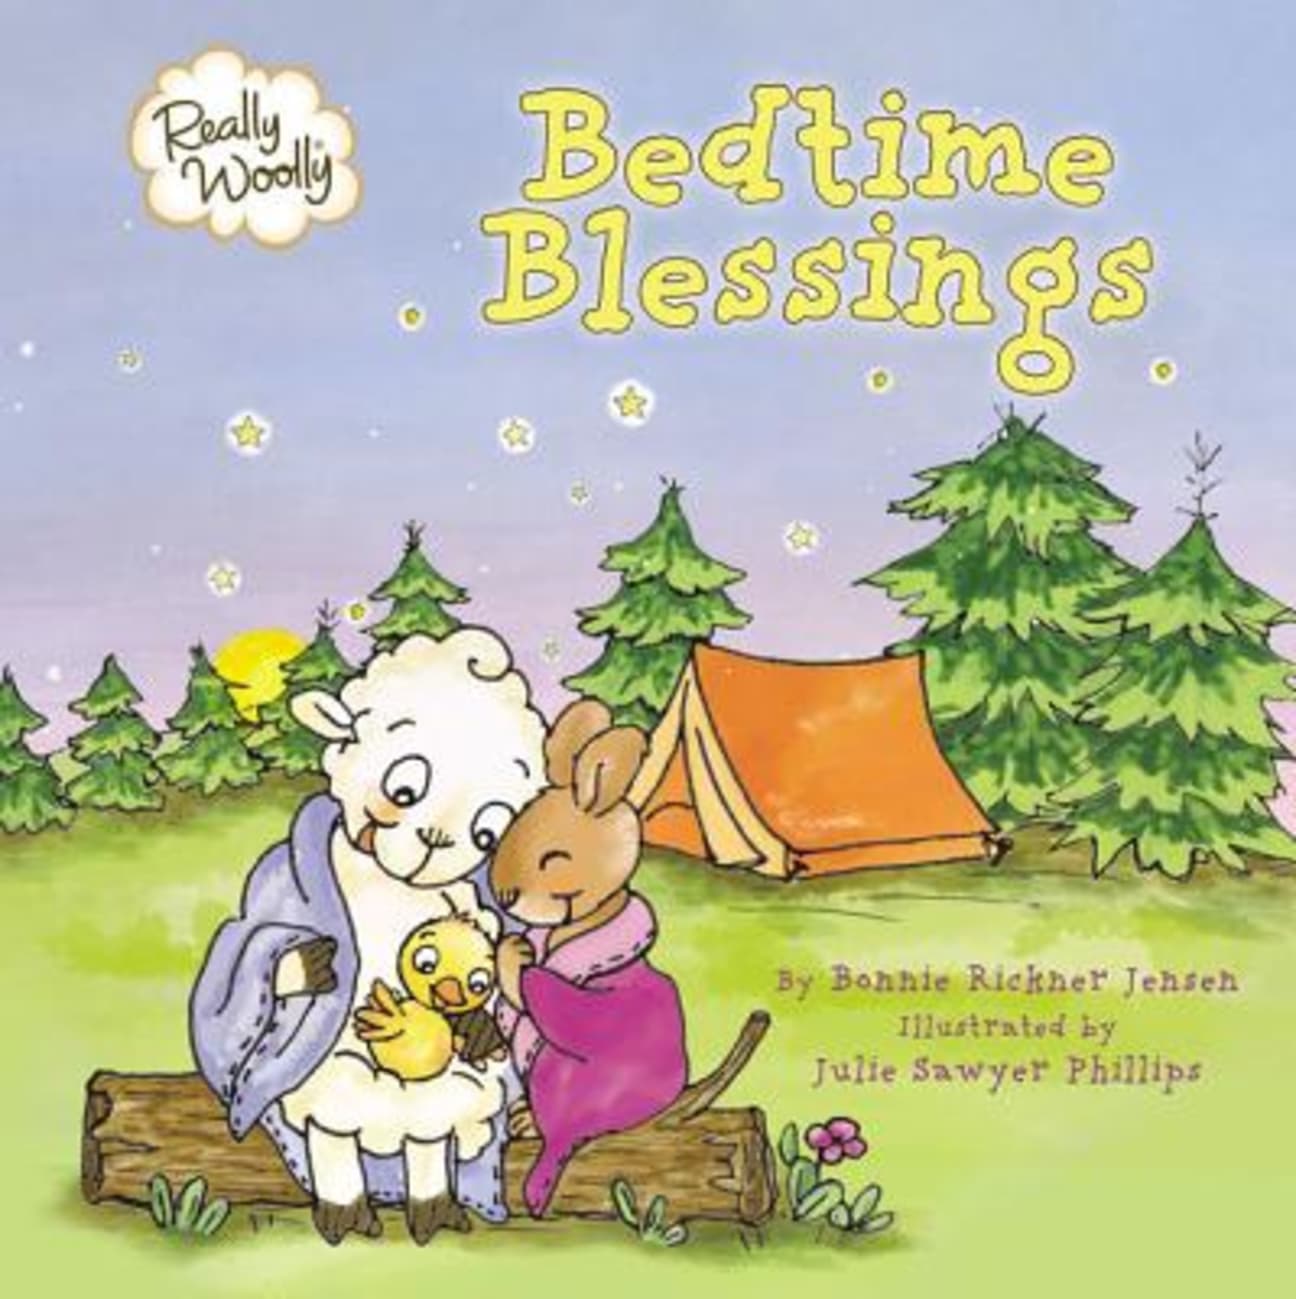 Really Woolly Bedtime Blessings Board Book